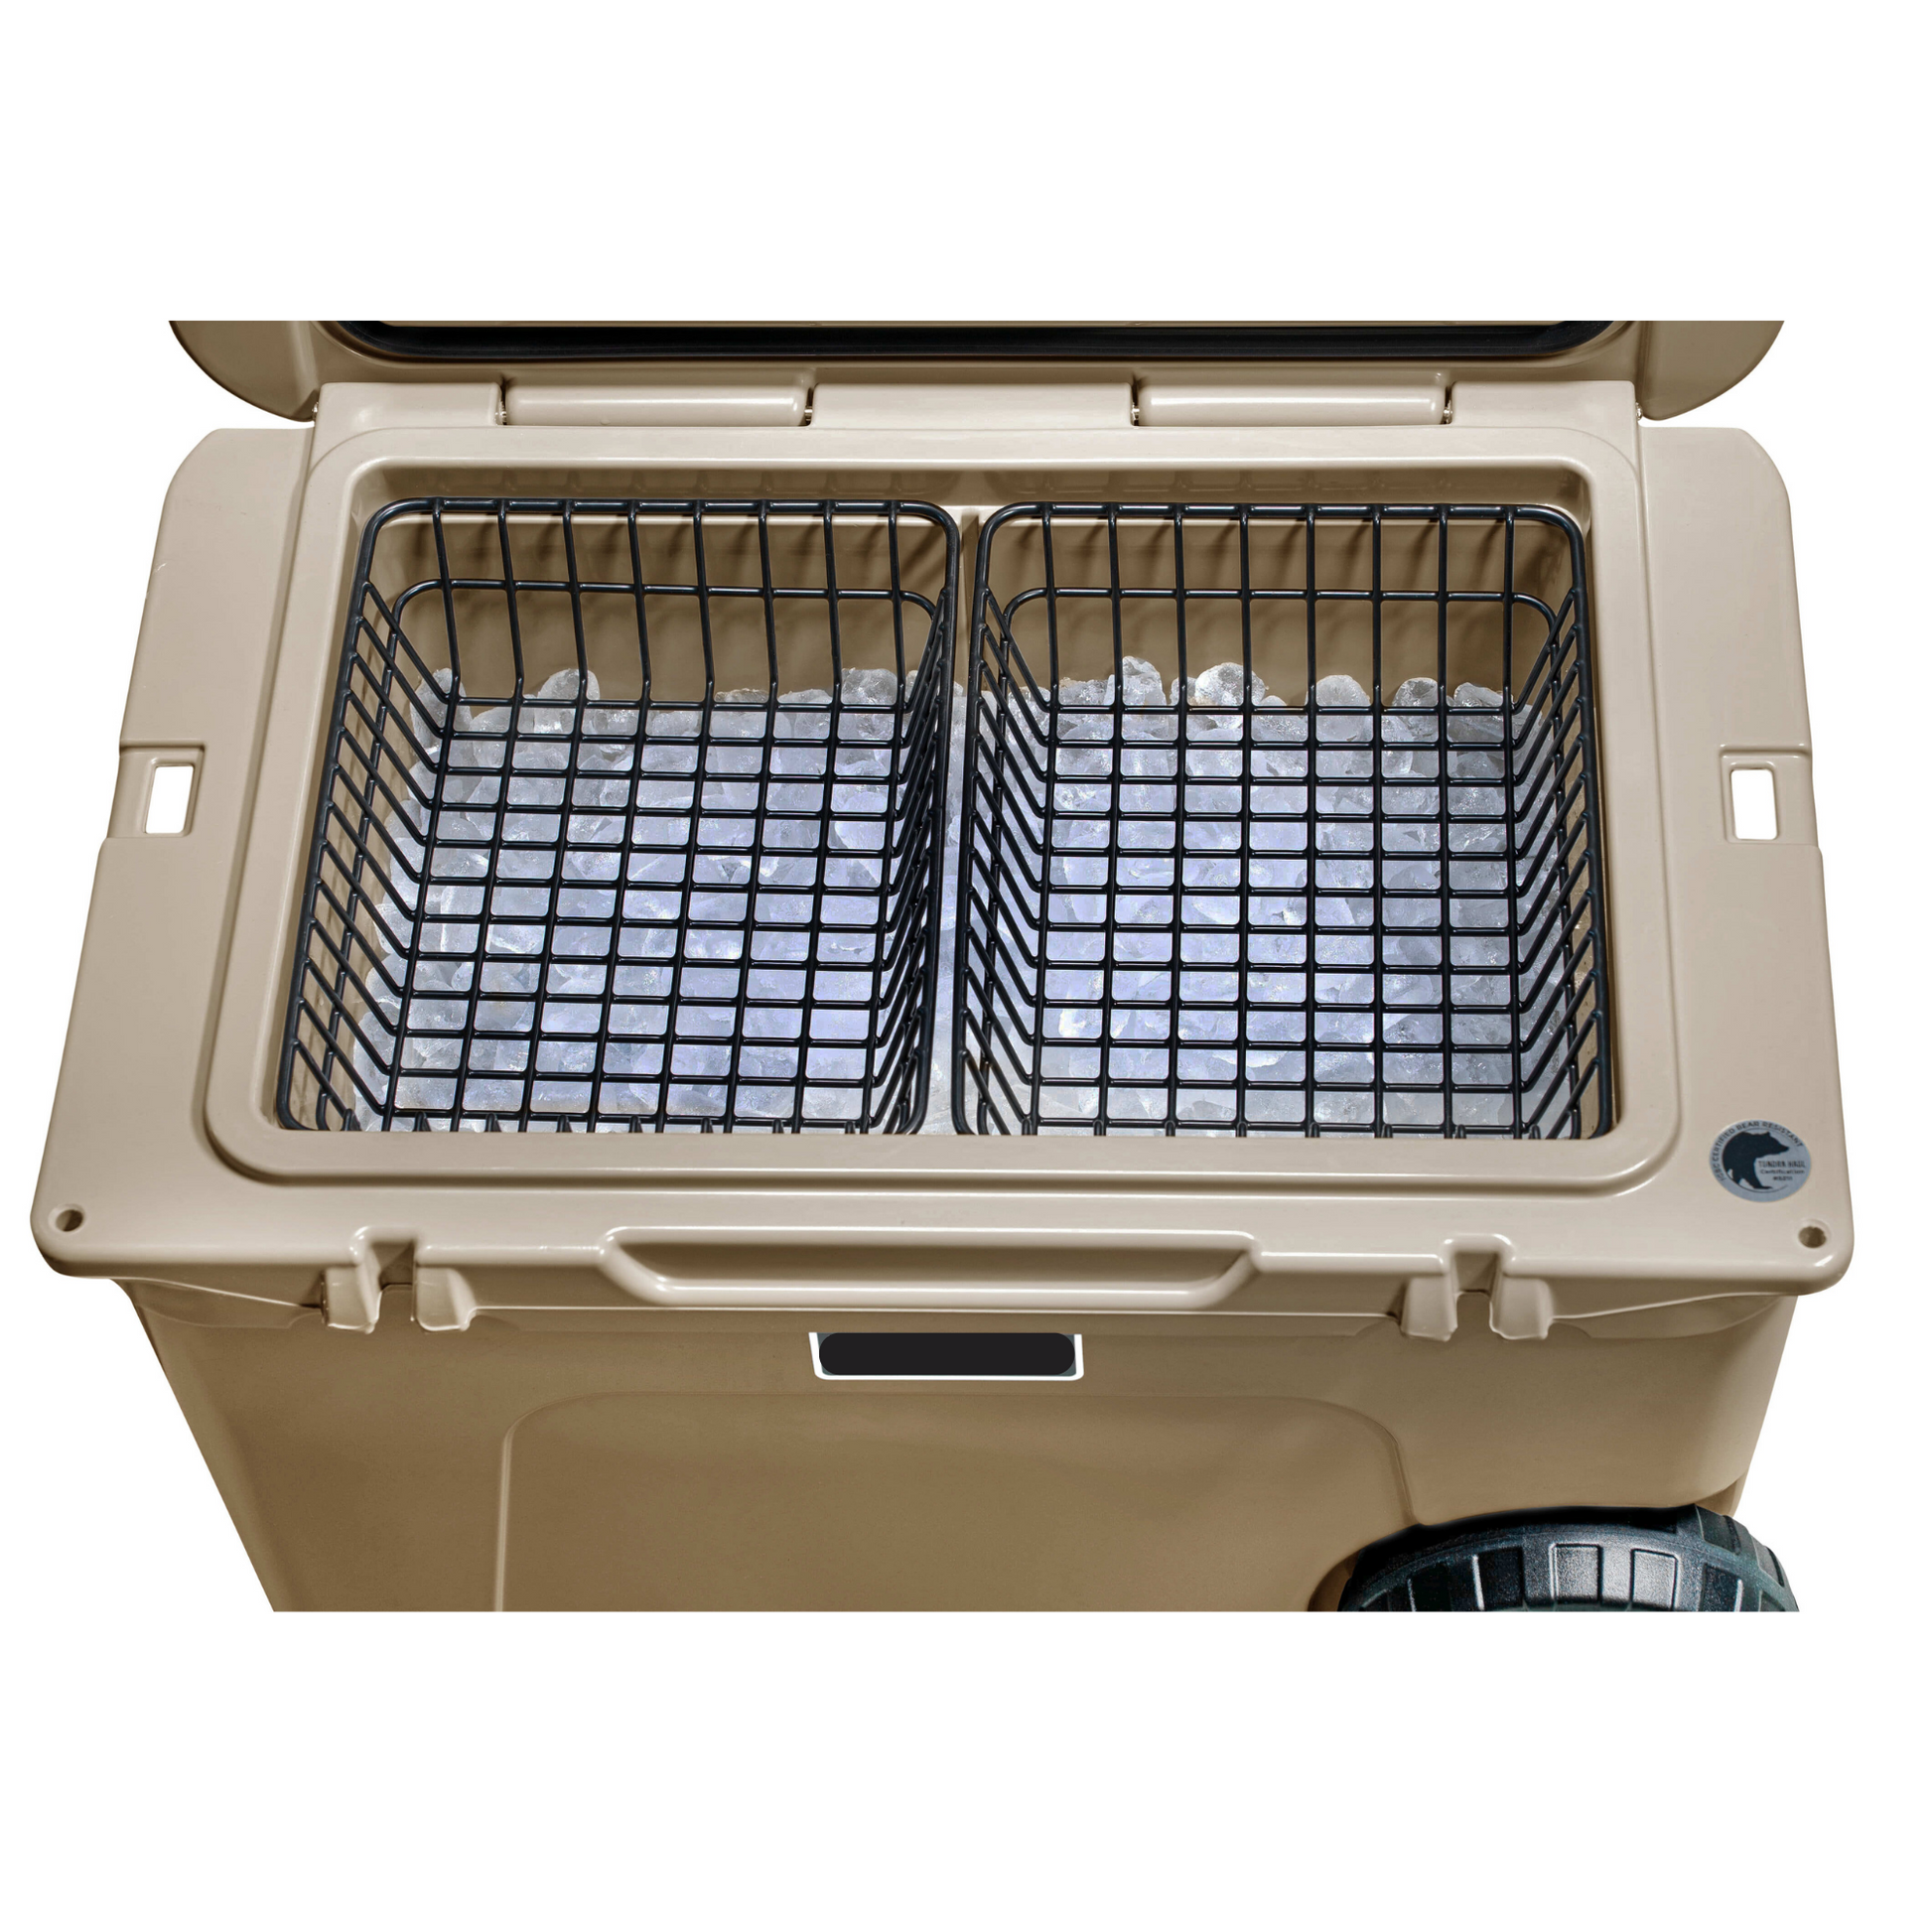 Aftermarket divider and dry good basket for Yeti Tundra Haul : r